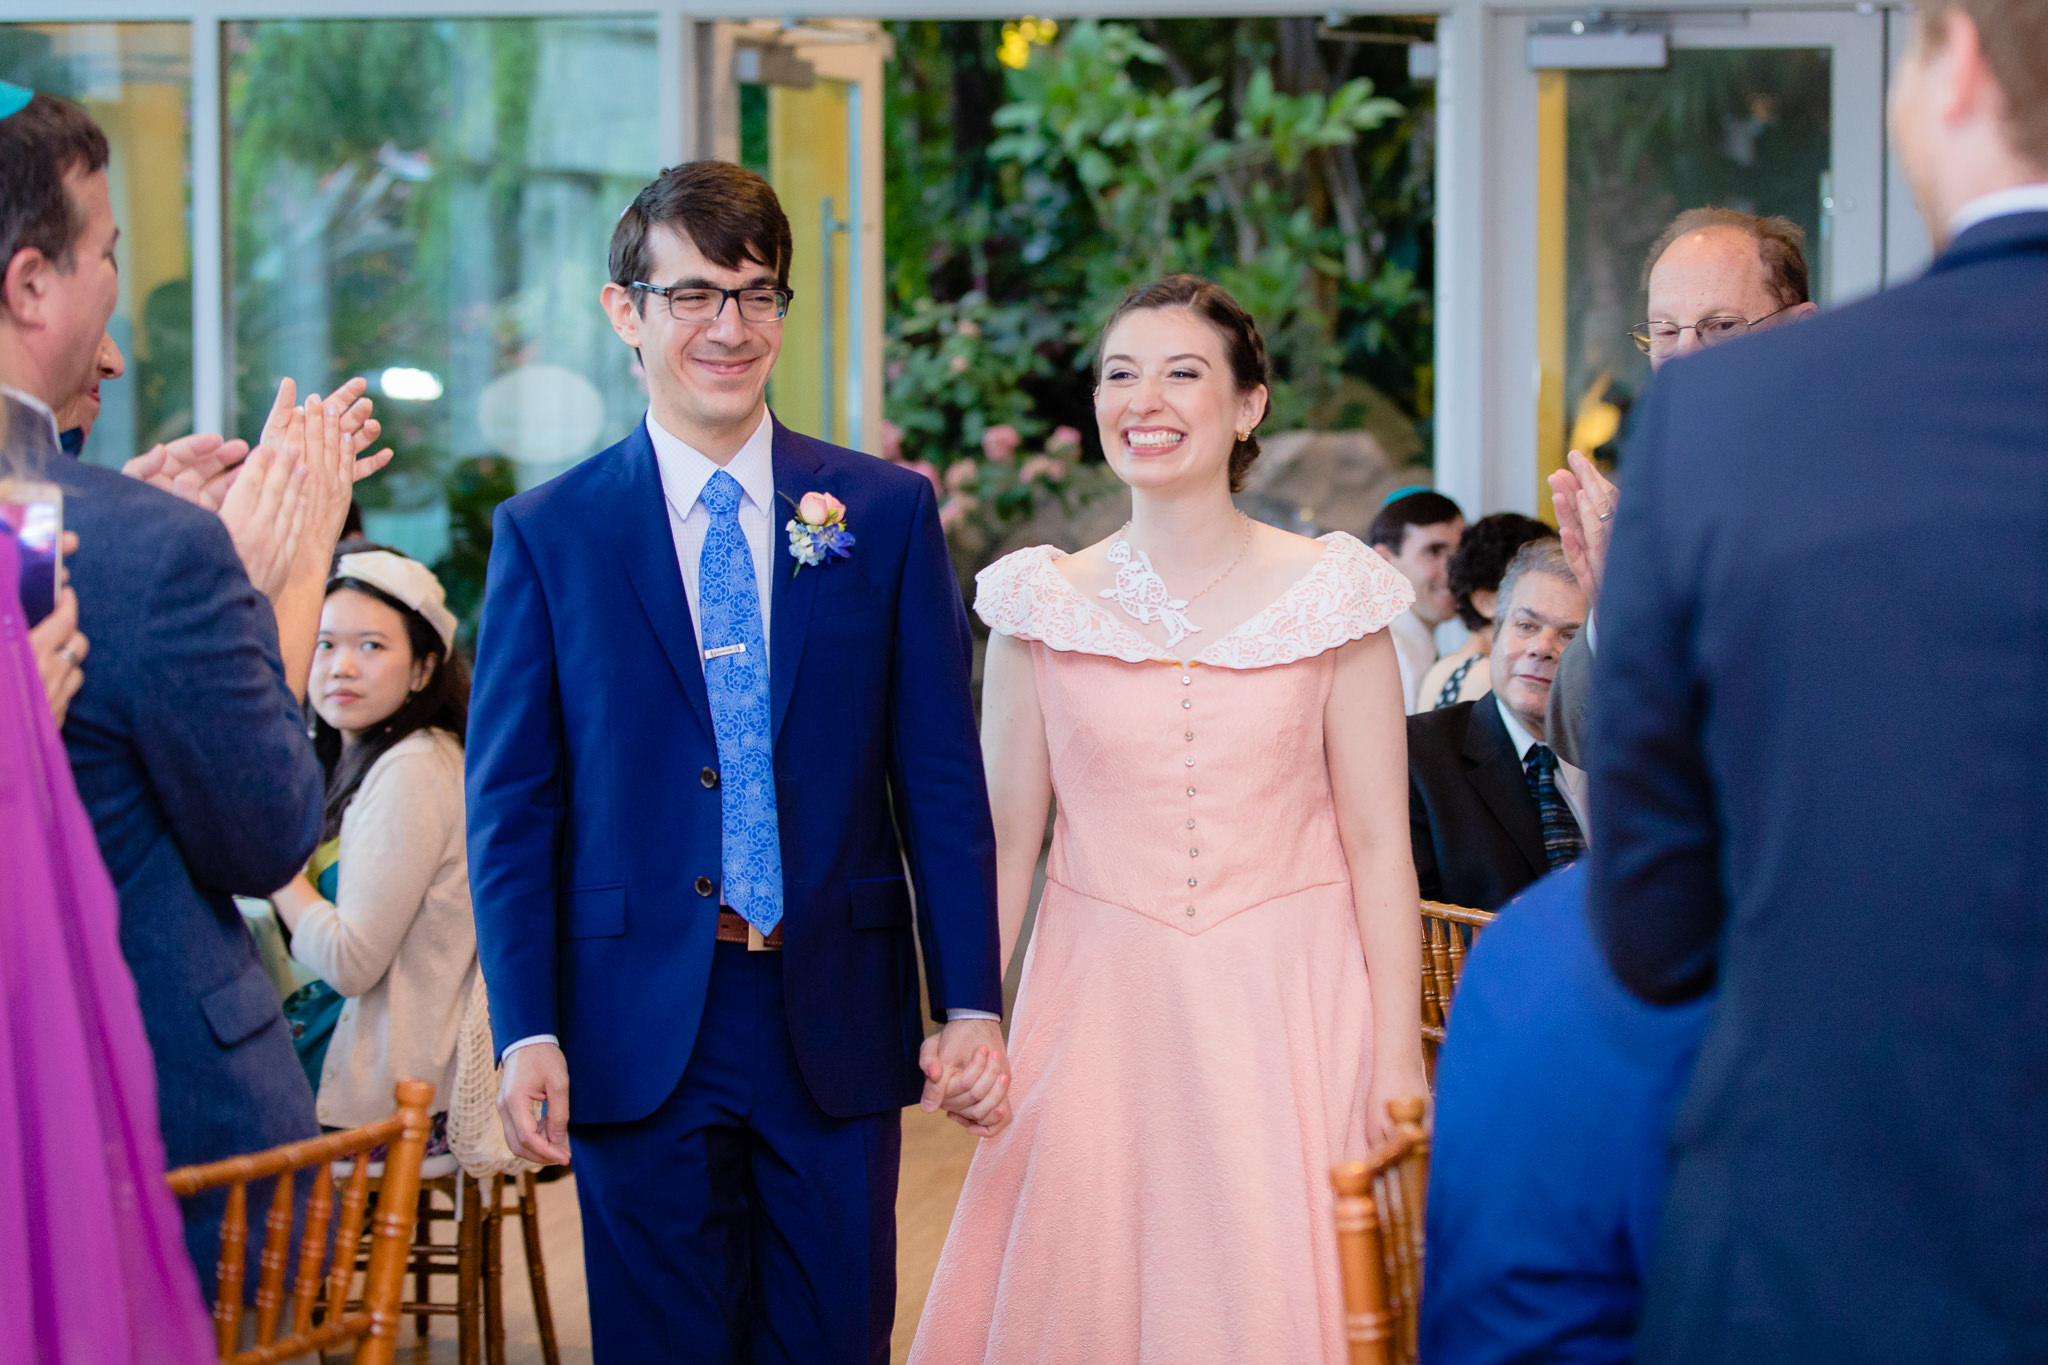 Newlyweds enter their reception at Phipps Conservatory